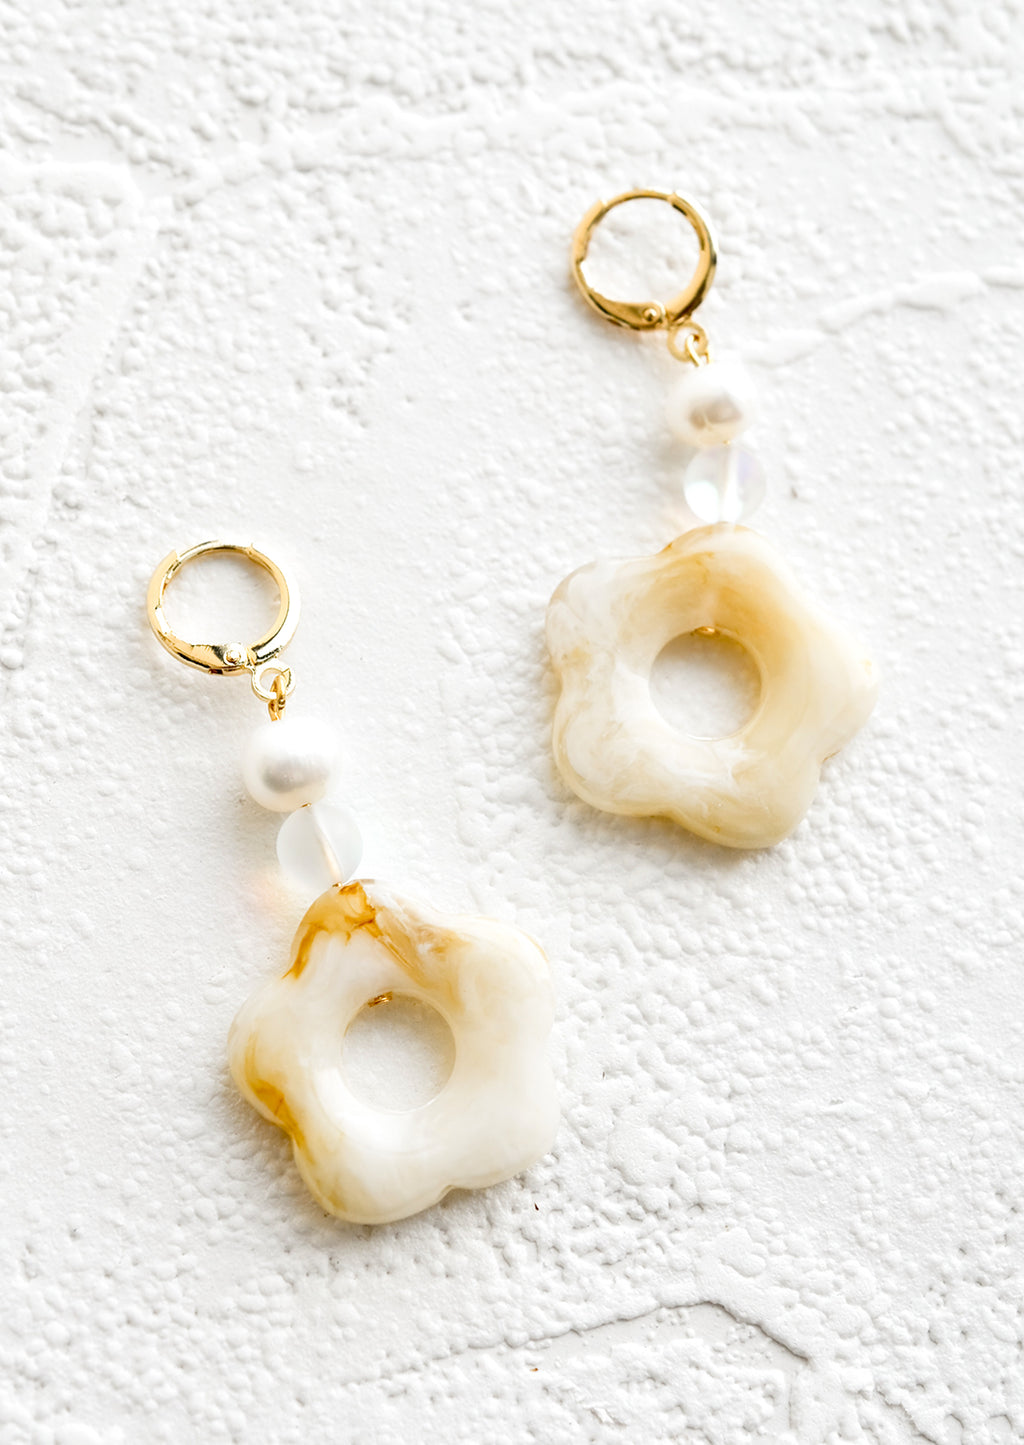 Beige / Clear: A pair of pearl and tan/white flower beaded dangle earrings strung from a gold huggie hoop.